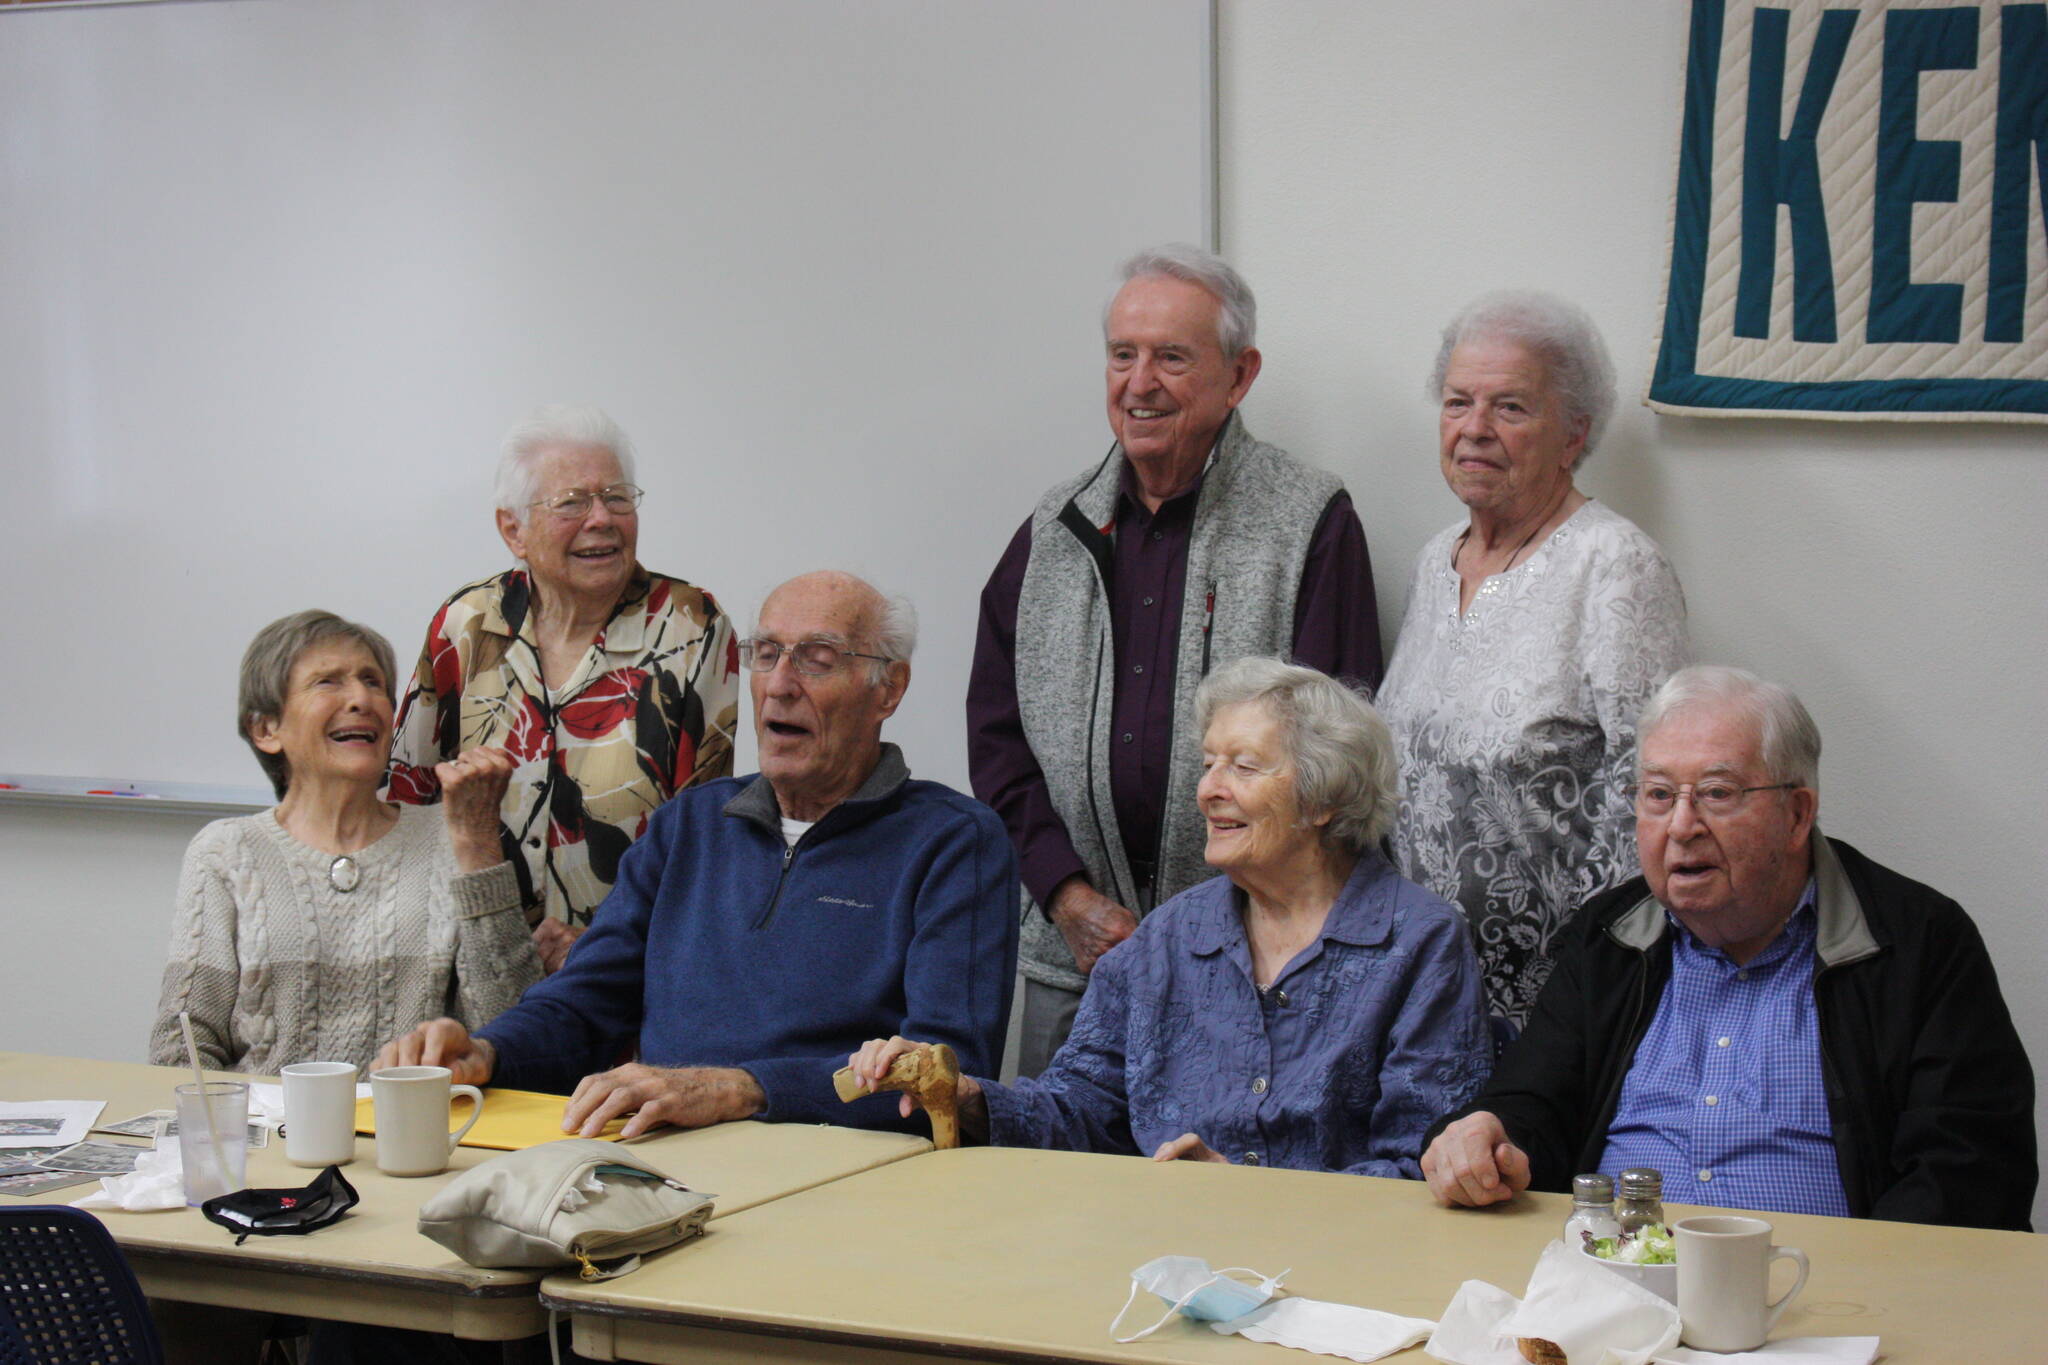 CAMERON SHEPPARD, Sound Publishing
The remaining members of the Kent High School class of 1946, (Front row left to right: Beverly Johnson, Roy Smith, Mary Loop and Harold Botts. Back row left to right: Joan Nelson, Dick Mergems, Phyllis Alford).